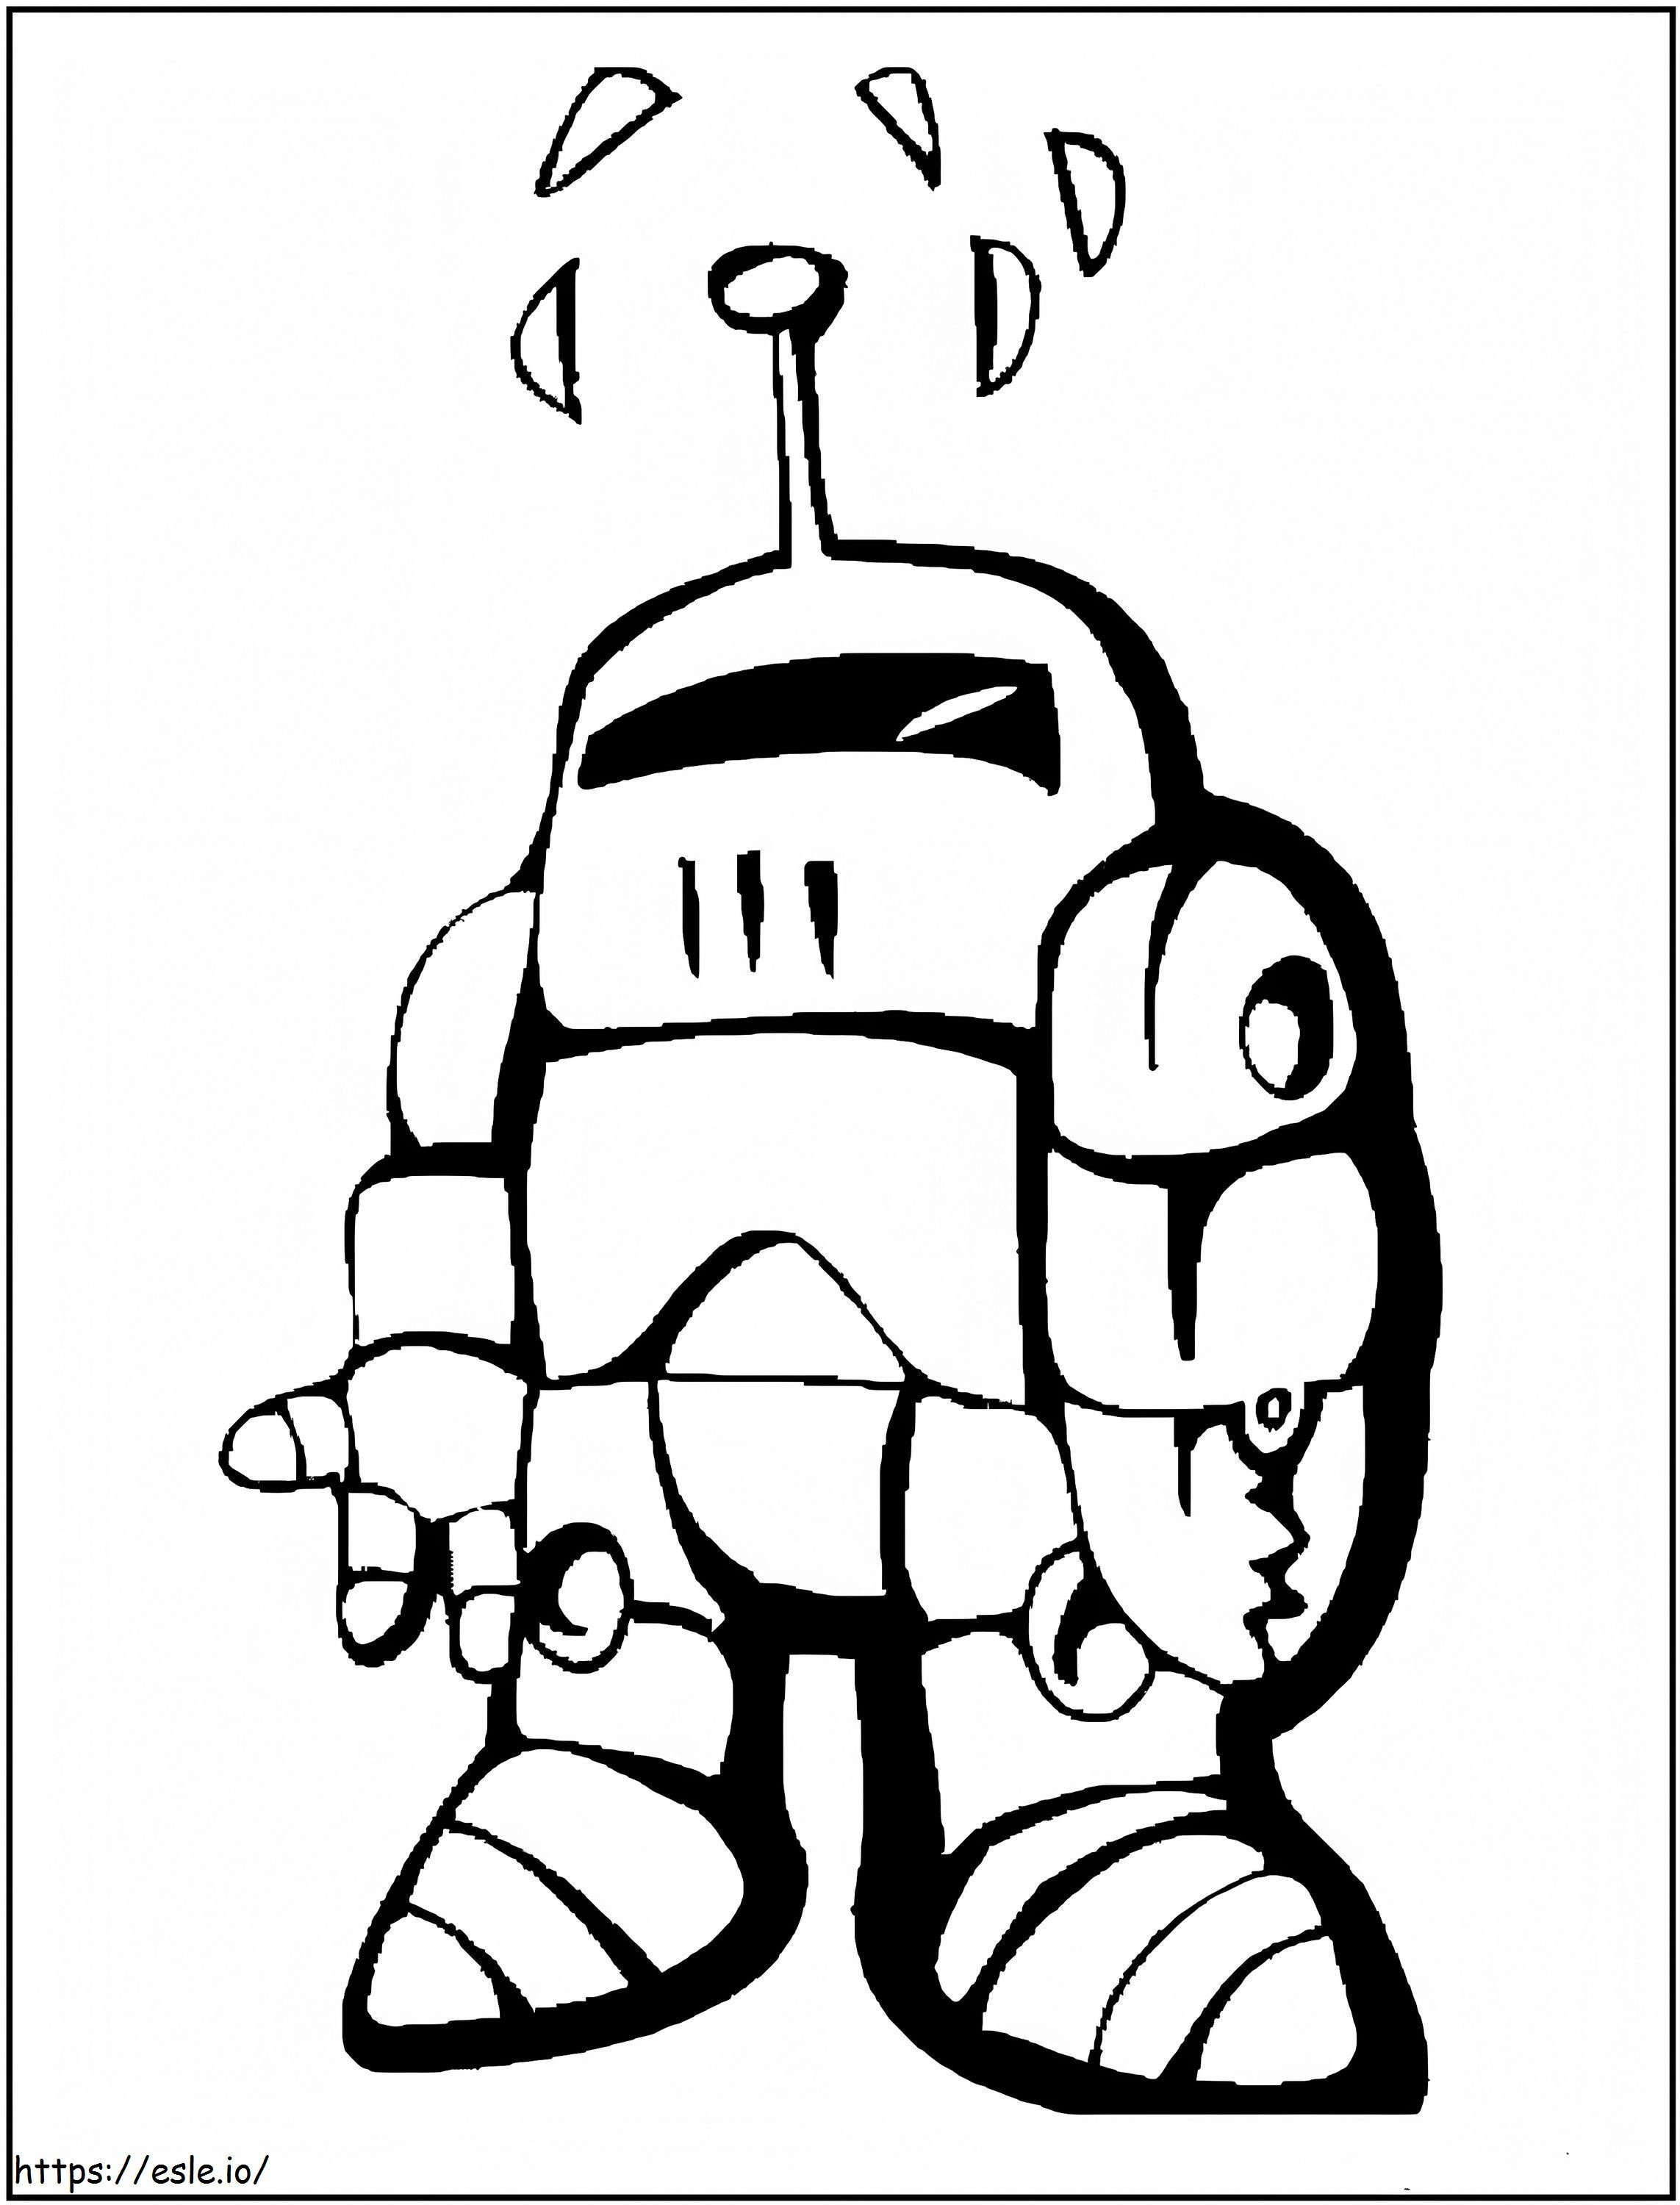 Perfect Robot Boy coloring page